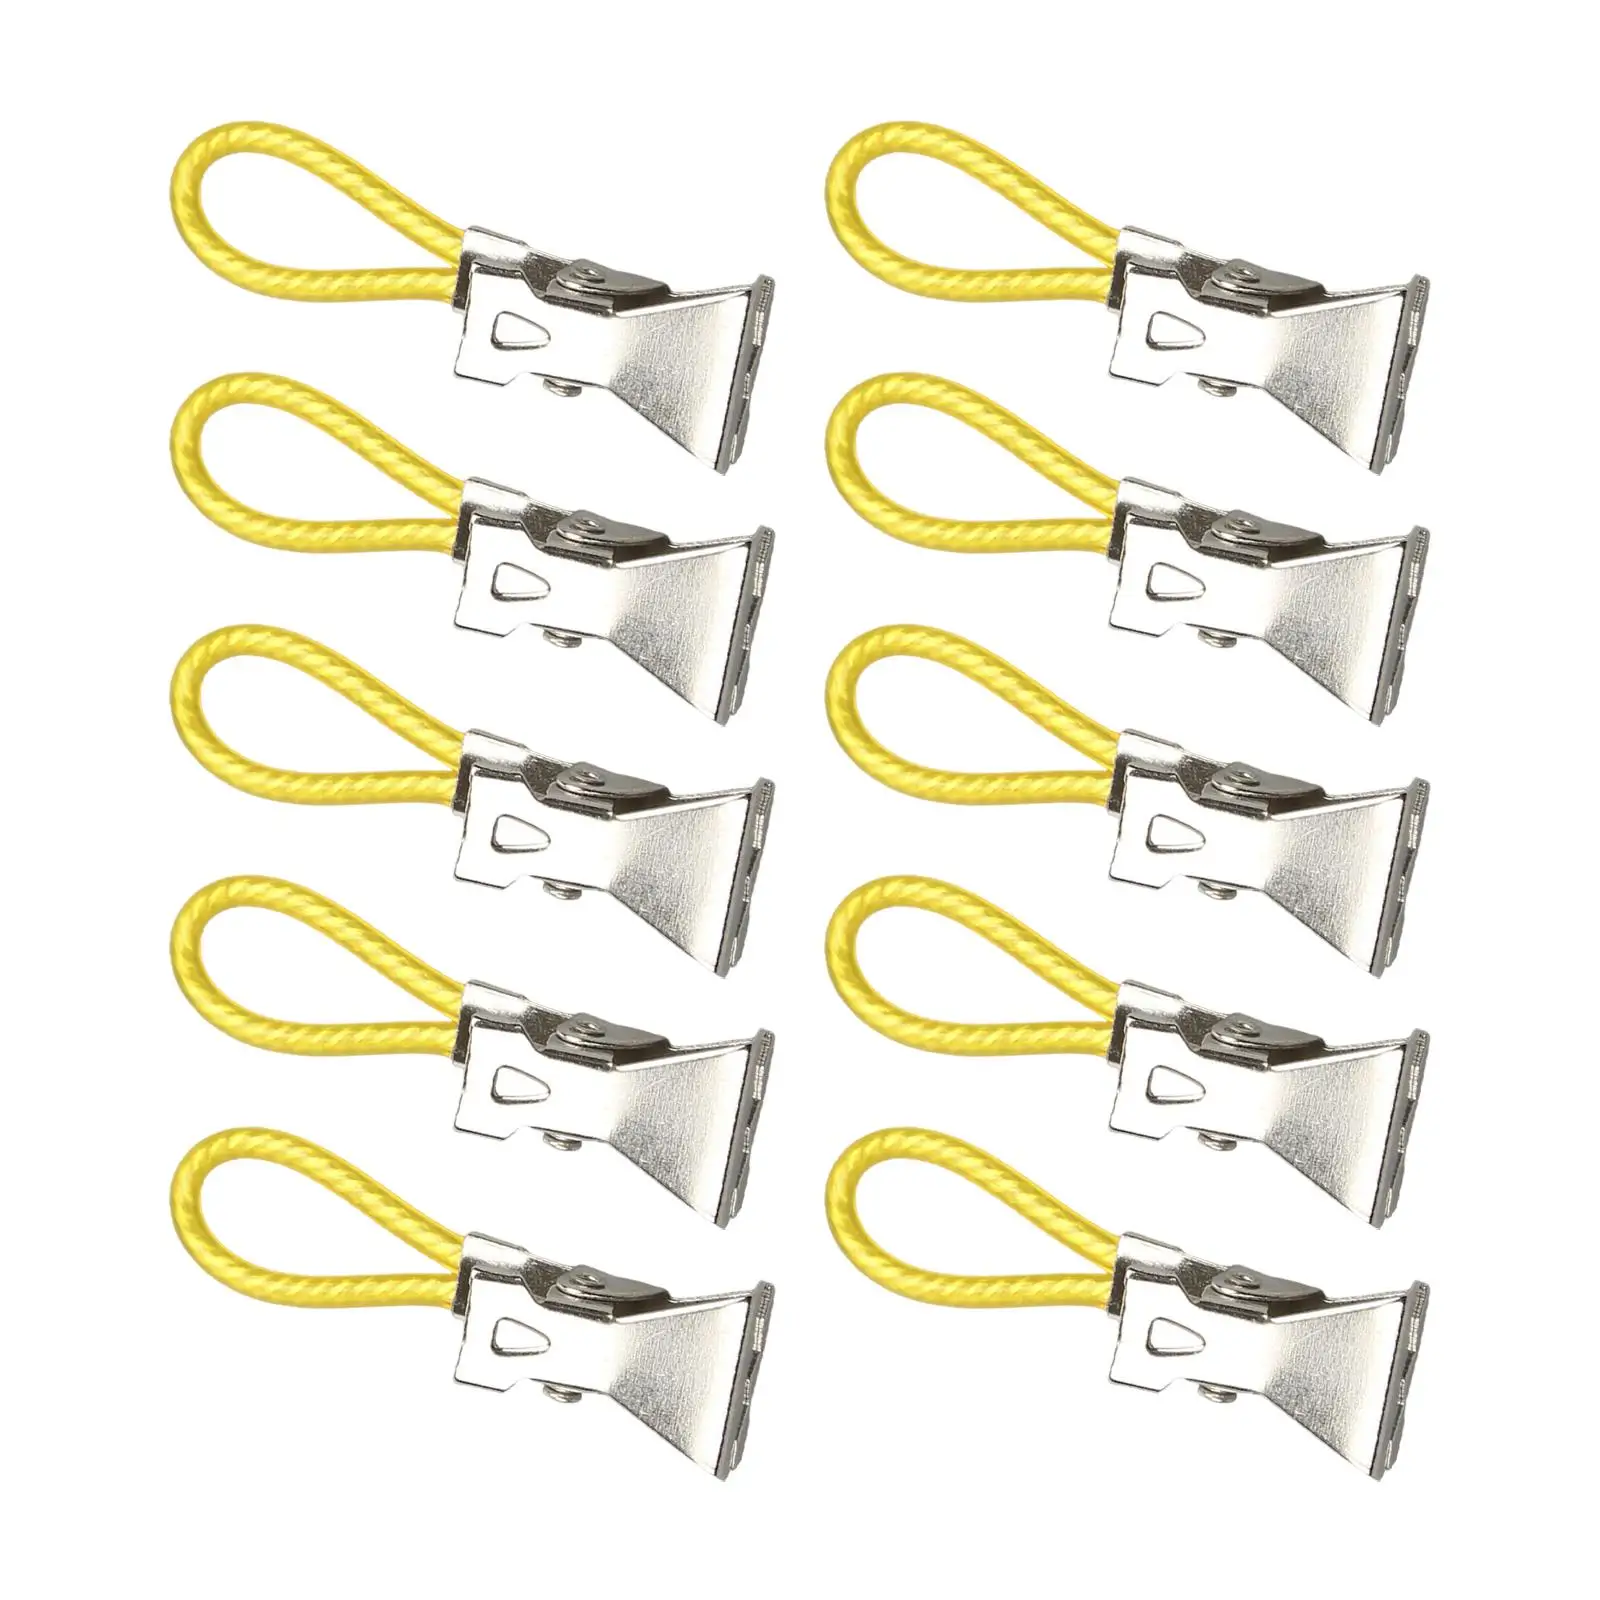 10 Pieces Tea Towel Hanging Clips Cupboard Multifunctional Cloth Hanger Kitchen Towels Clips with Hanging Loop for Small Clothes